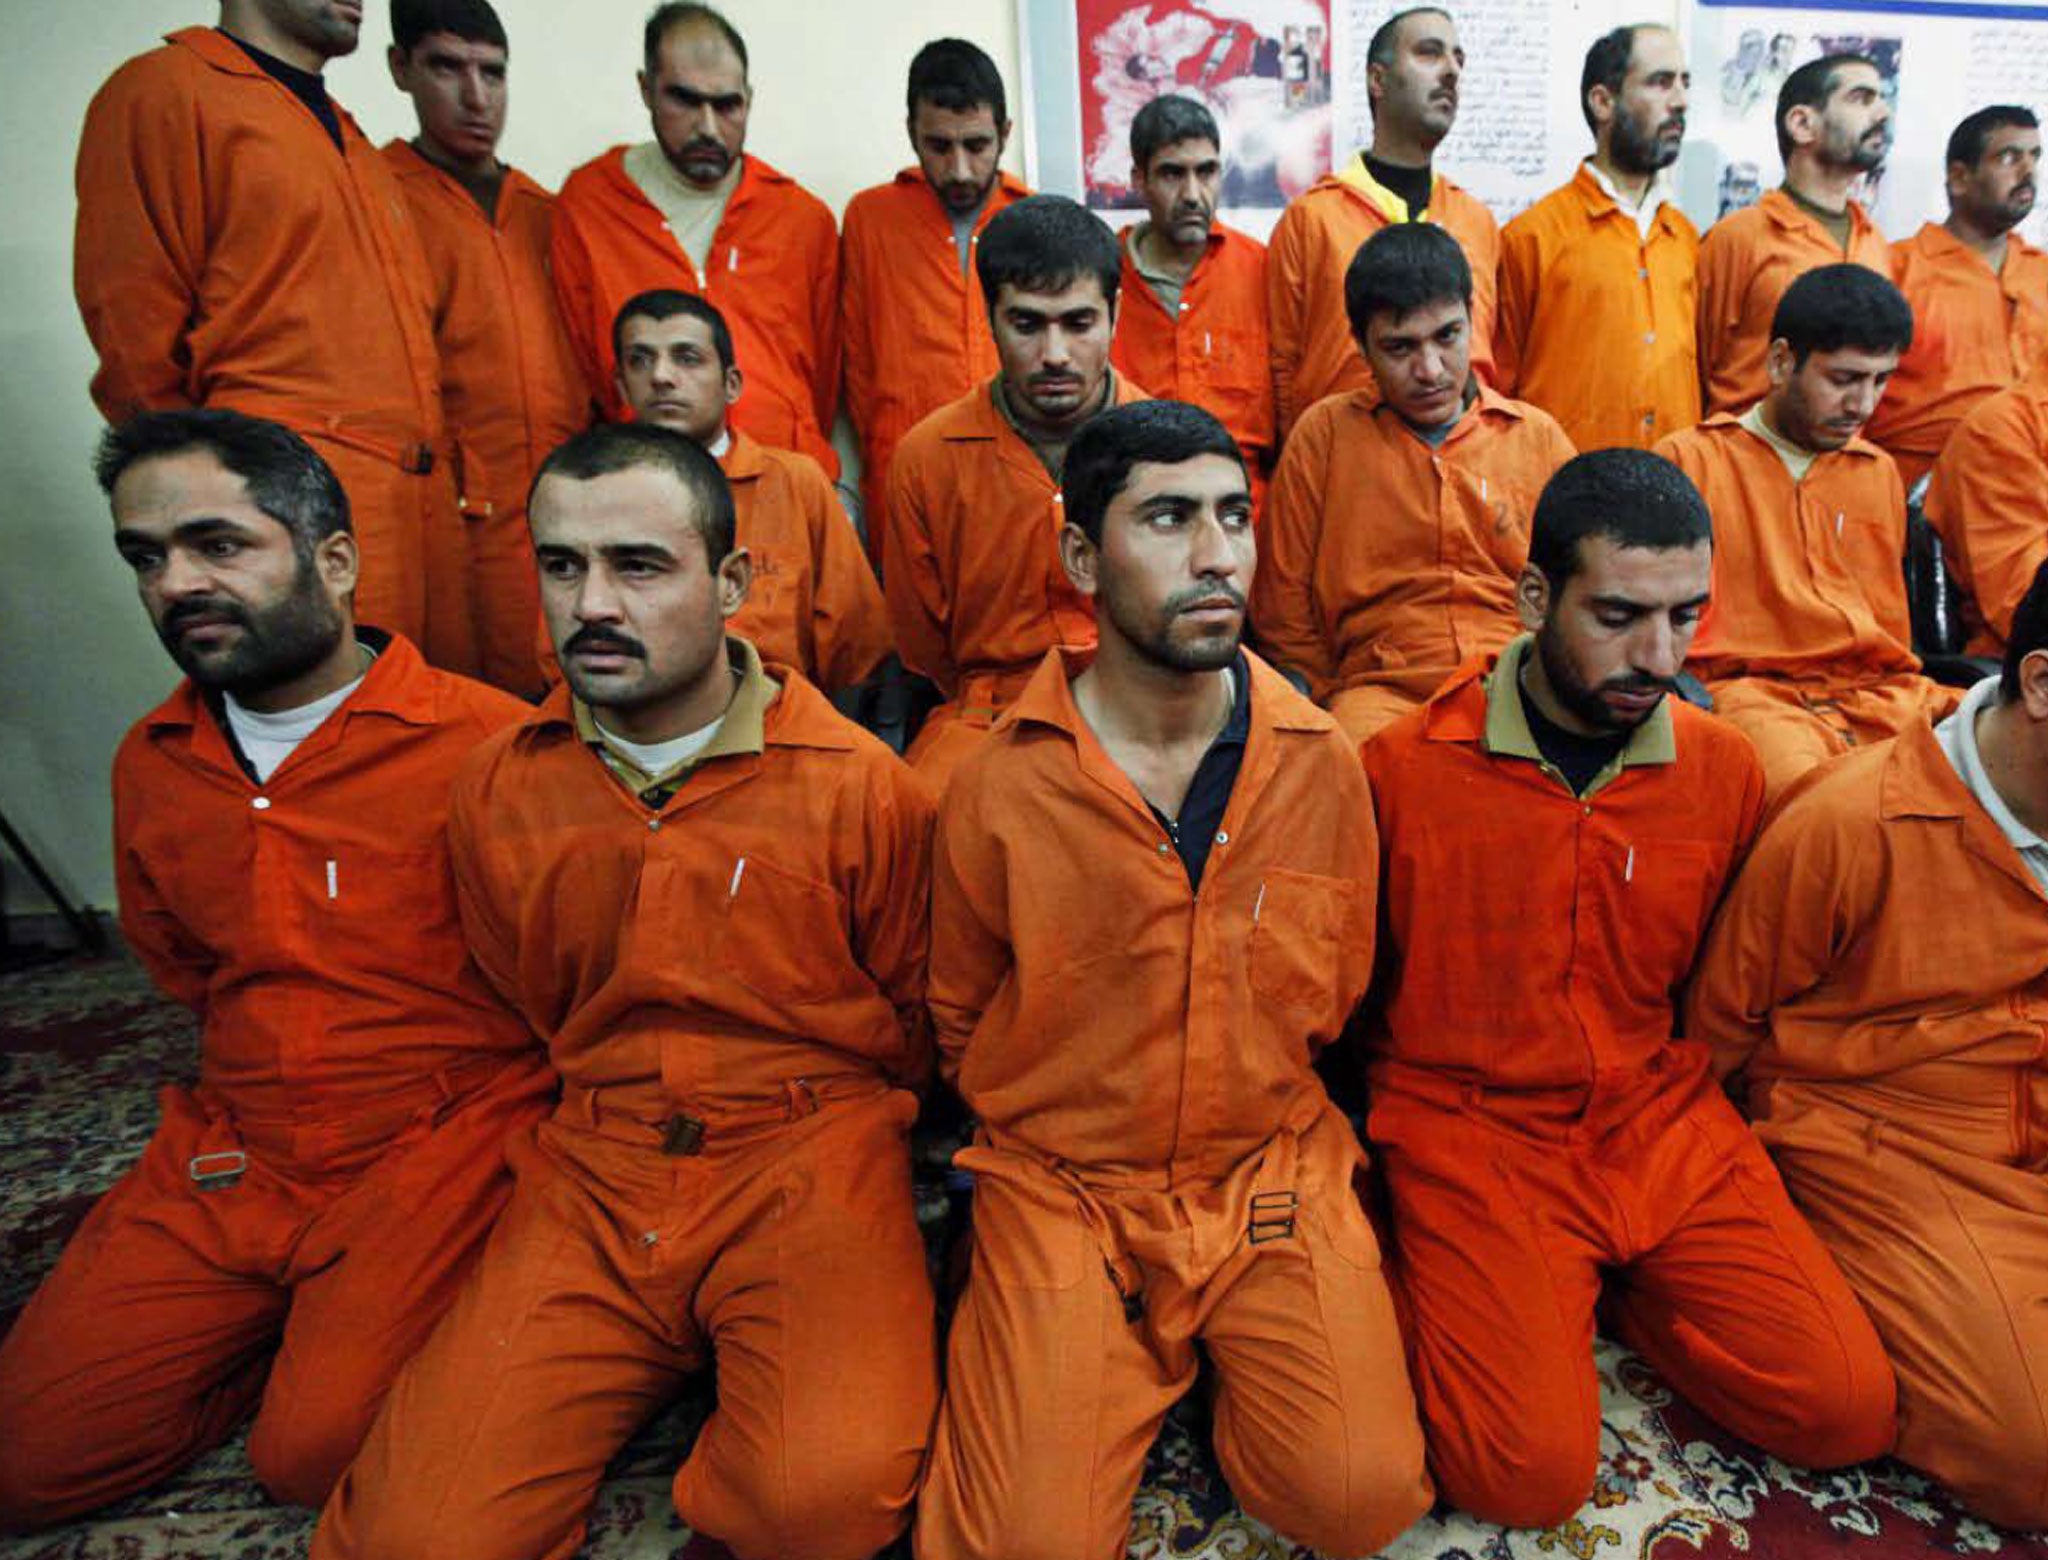 Suspects accused of having links to al-Qa’ida are shown to the press at a Baghdad facility. Post-Saddam, Iraq has executed hundreds of prisoners, many of them following ‘confessions’ before their trials